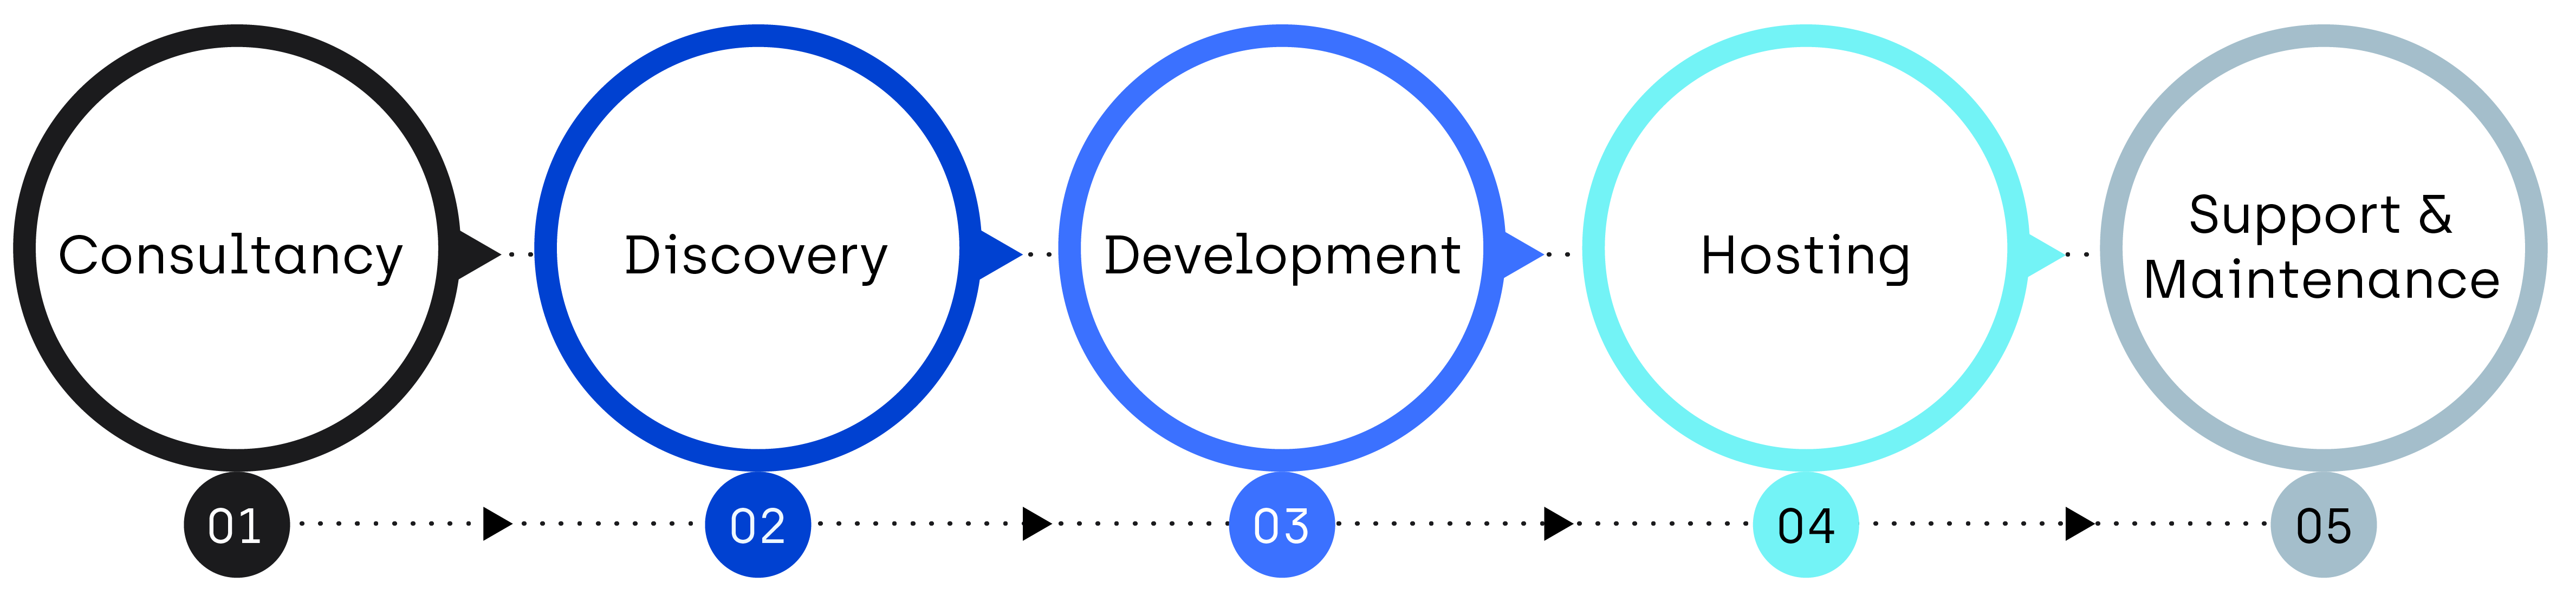 Graphic depicting the end-to-end software development process